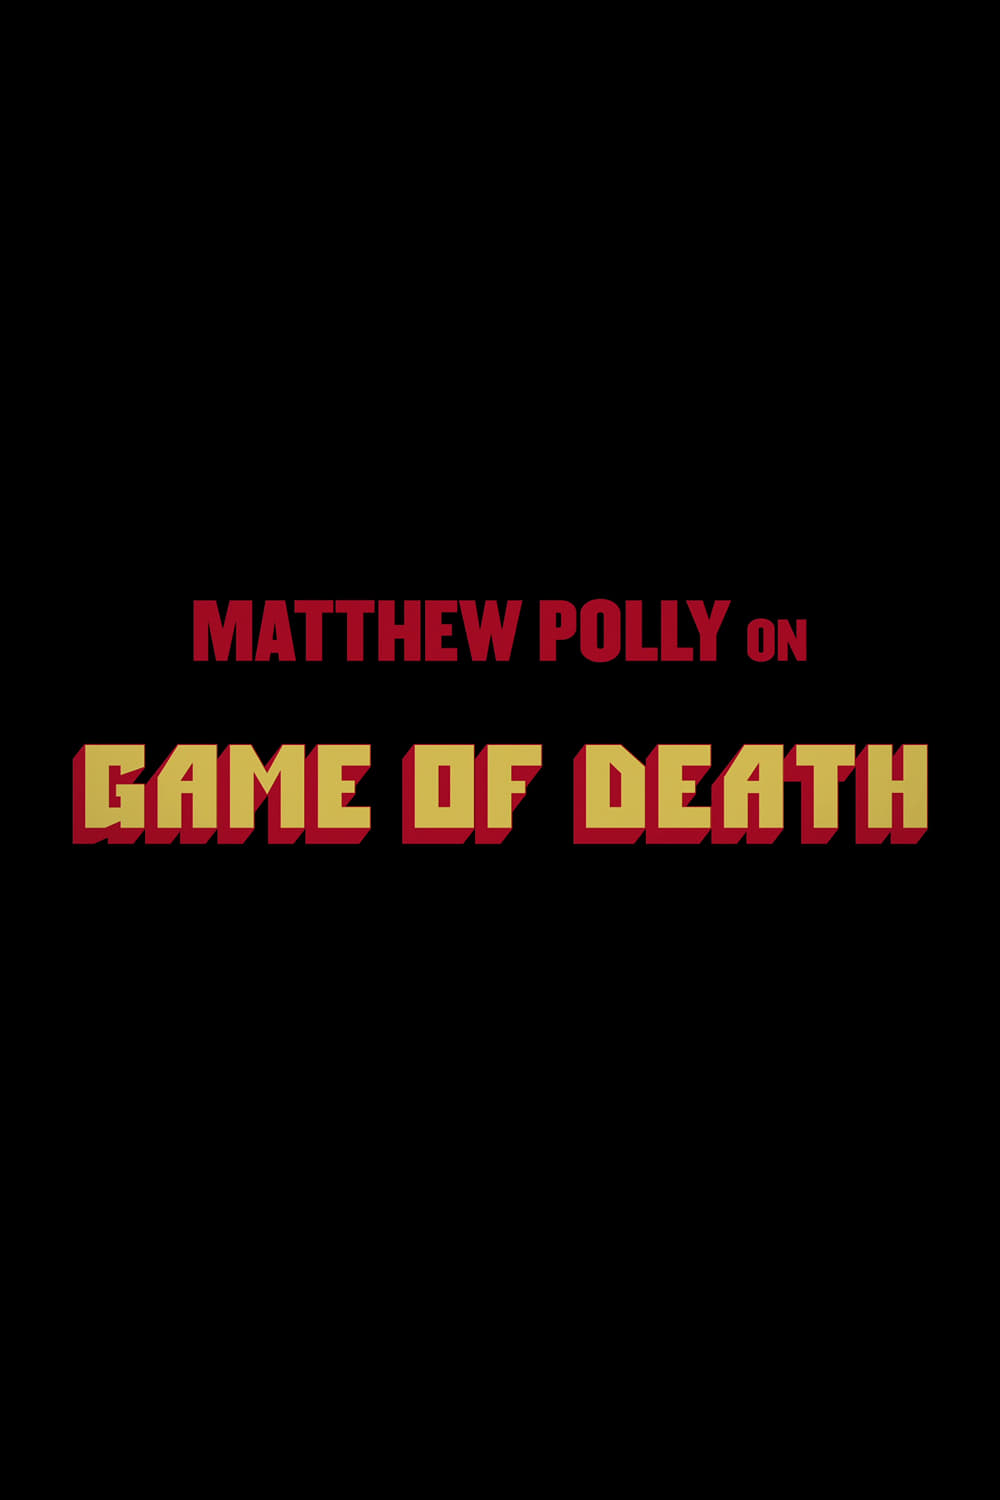 Matthew Polly On "Game Of Death"